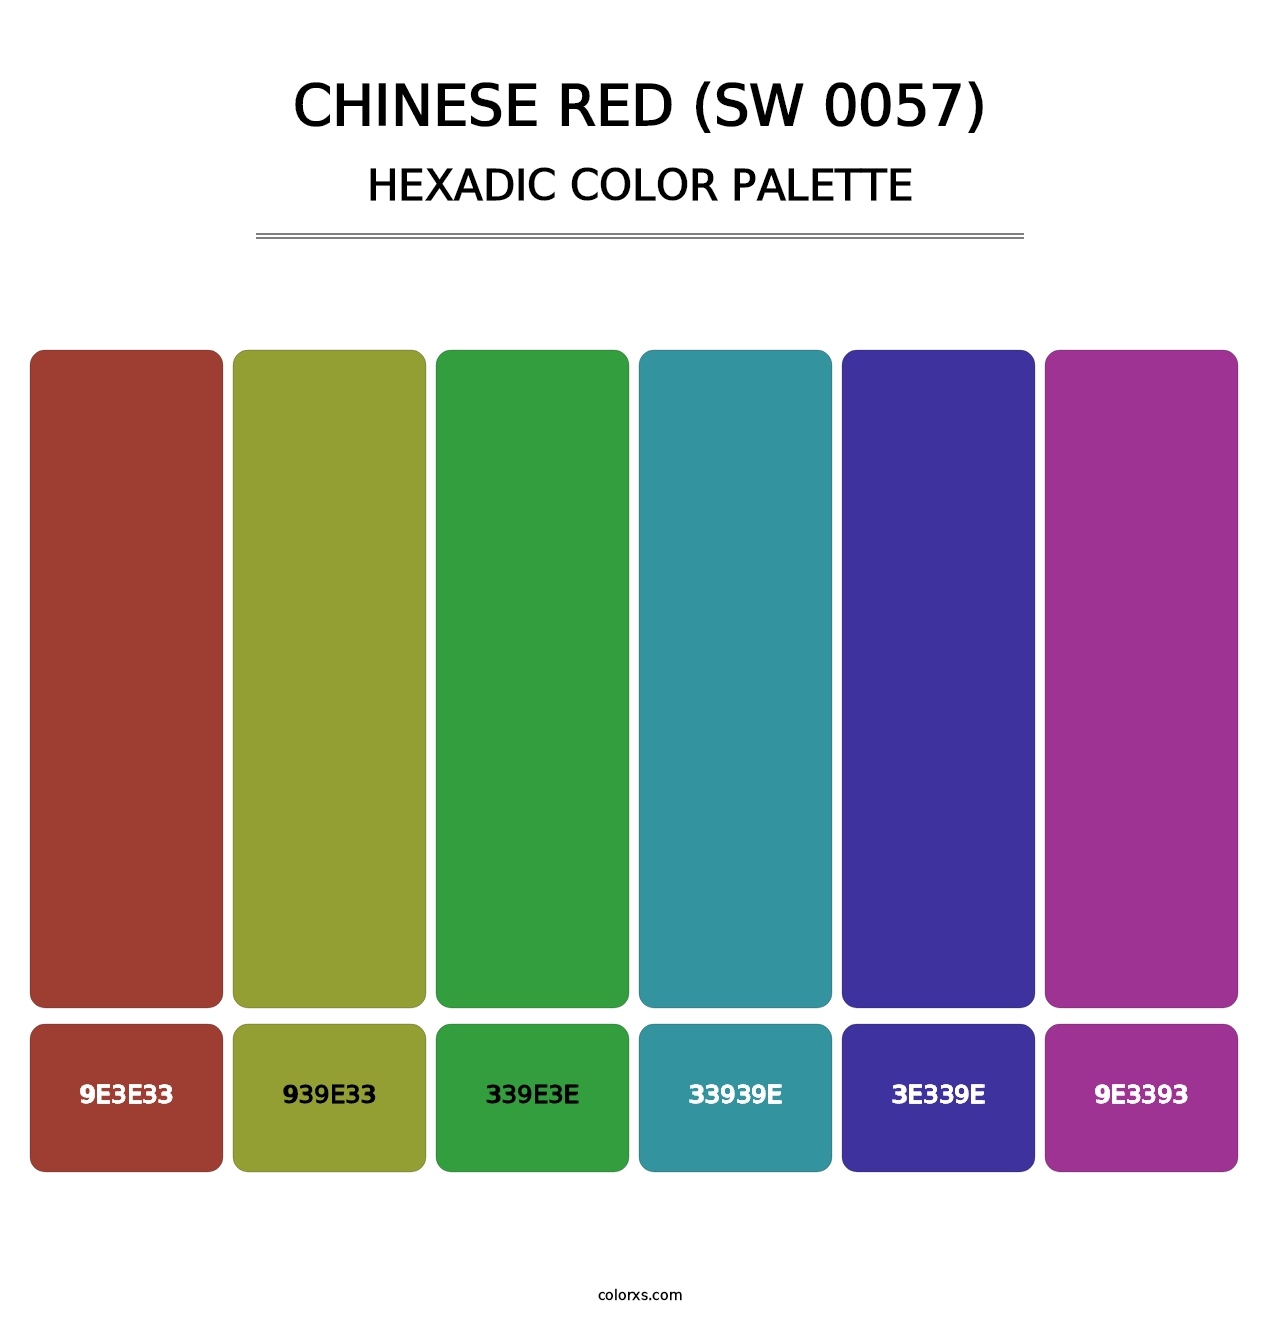 Chinese Red (SW 0057) - Hexadic Color Palette